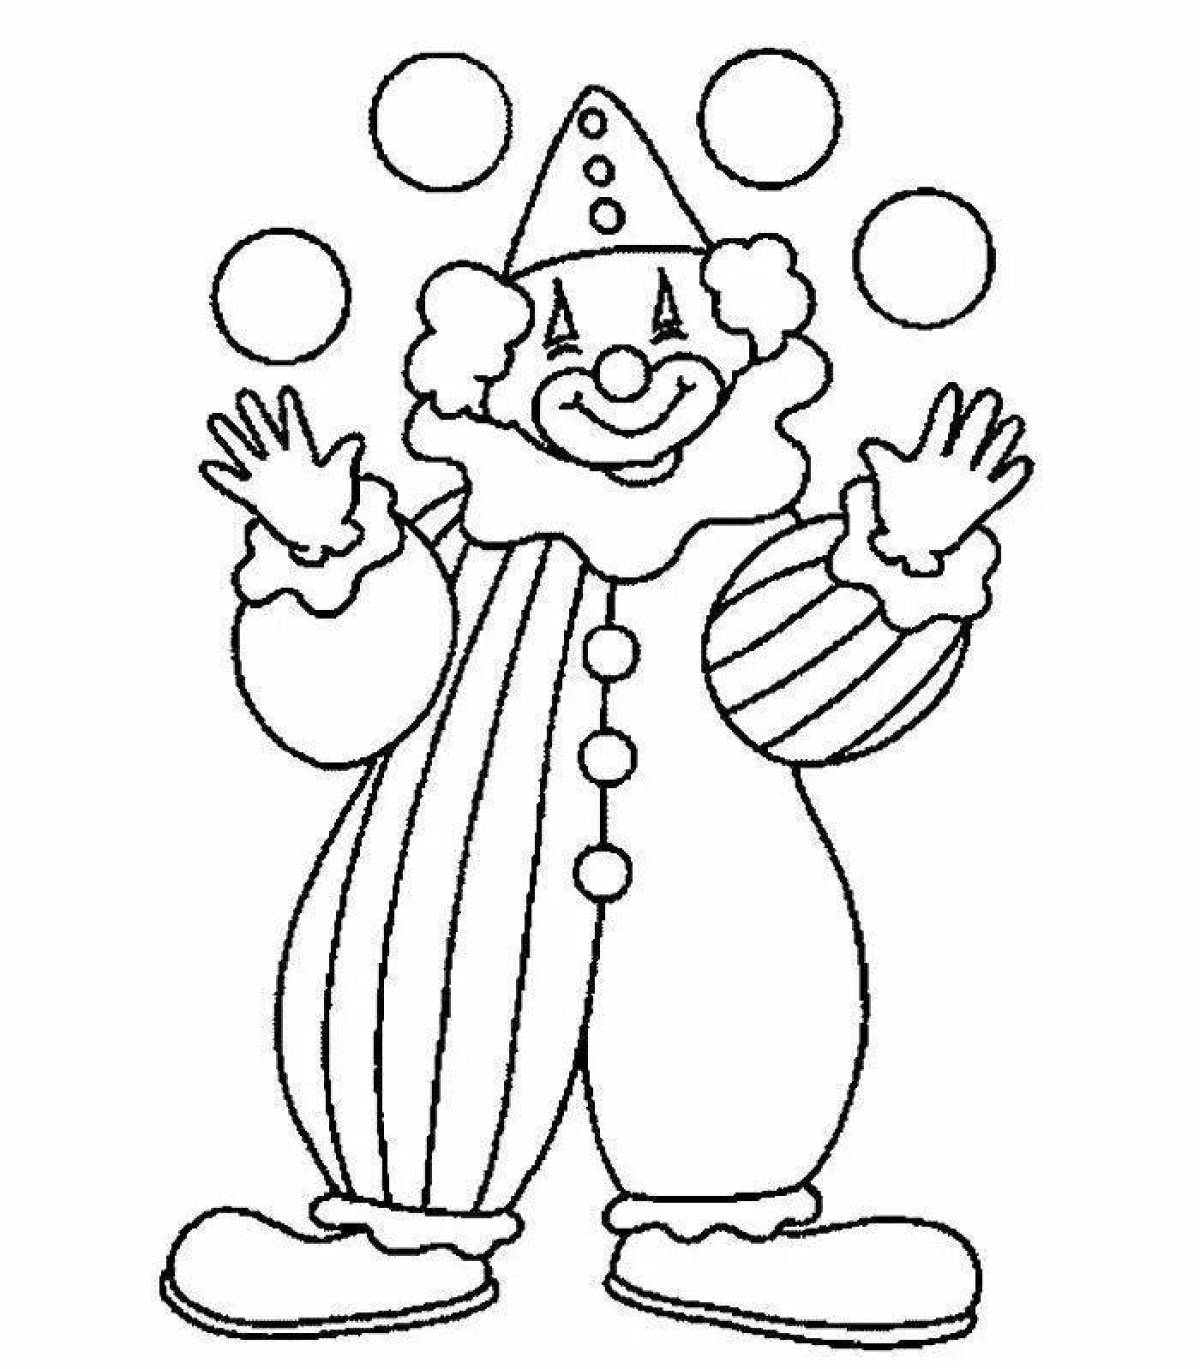 Coloring funny clown for kids